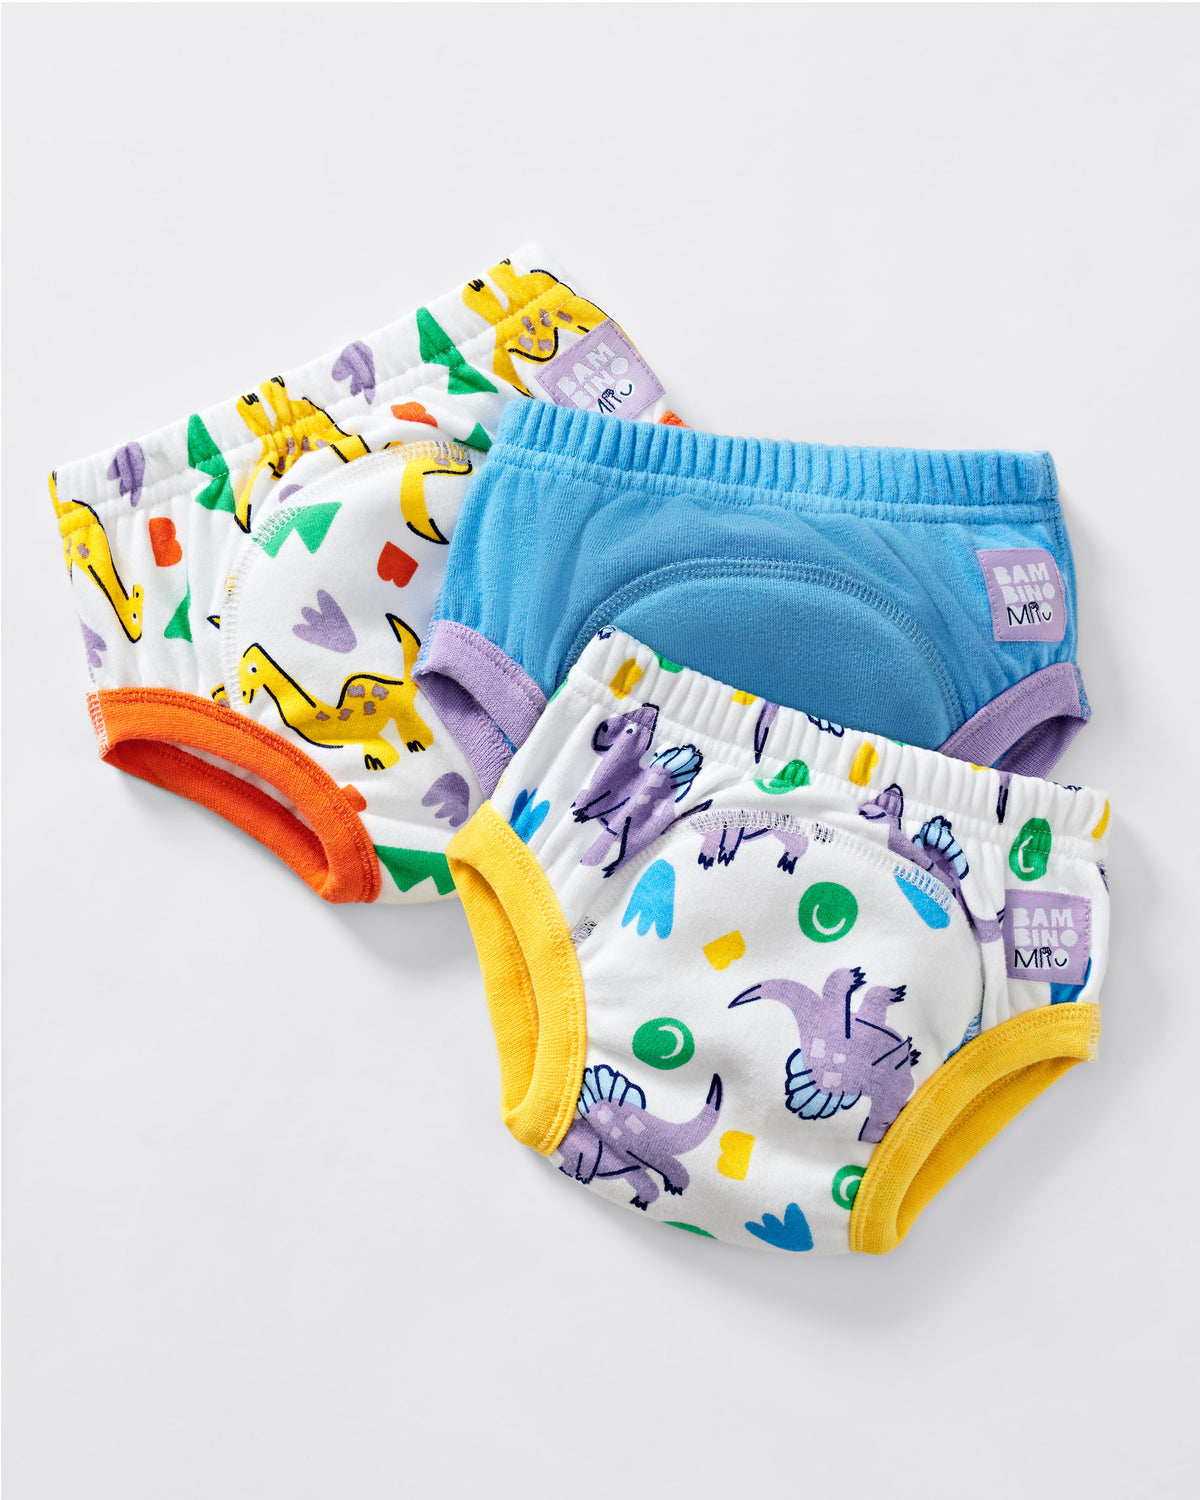 Disney Cars Toddler Boy Potty Training Pant Multipacks, CarsTraining7pk,  Sizes 18 M, 2T, 3T, 4T, 7-pack Training Pant, 2 Years : Buy Online at Best  Price in KSA - Souq is now